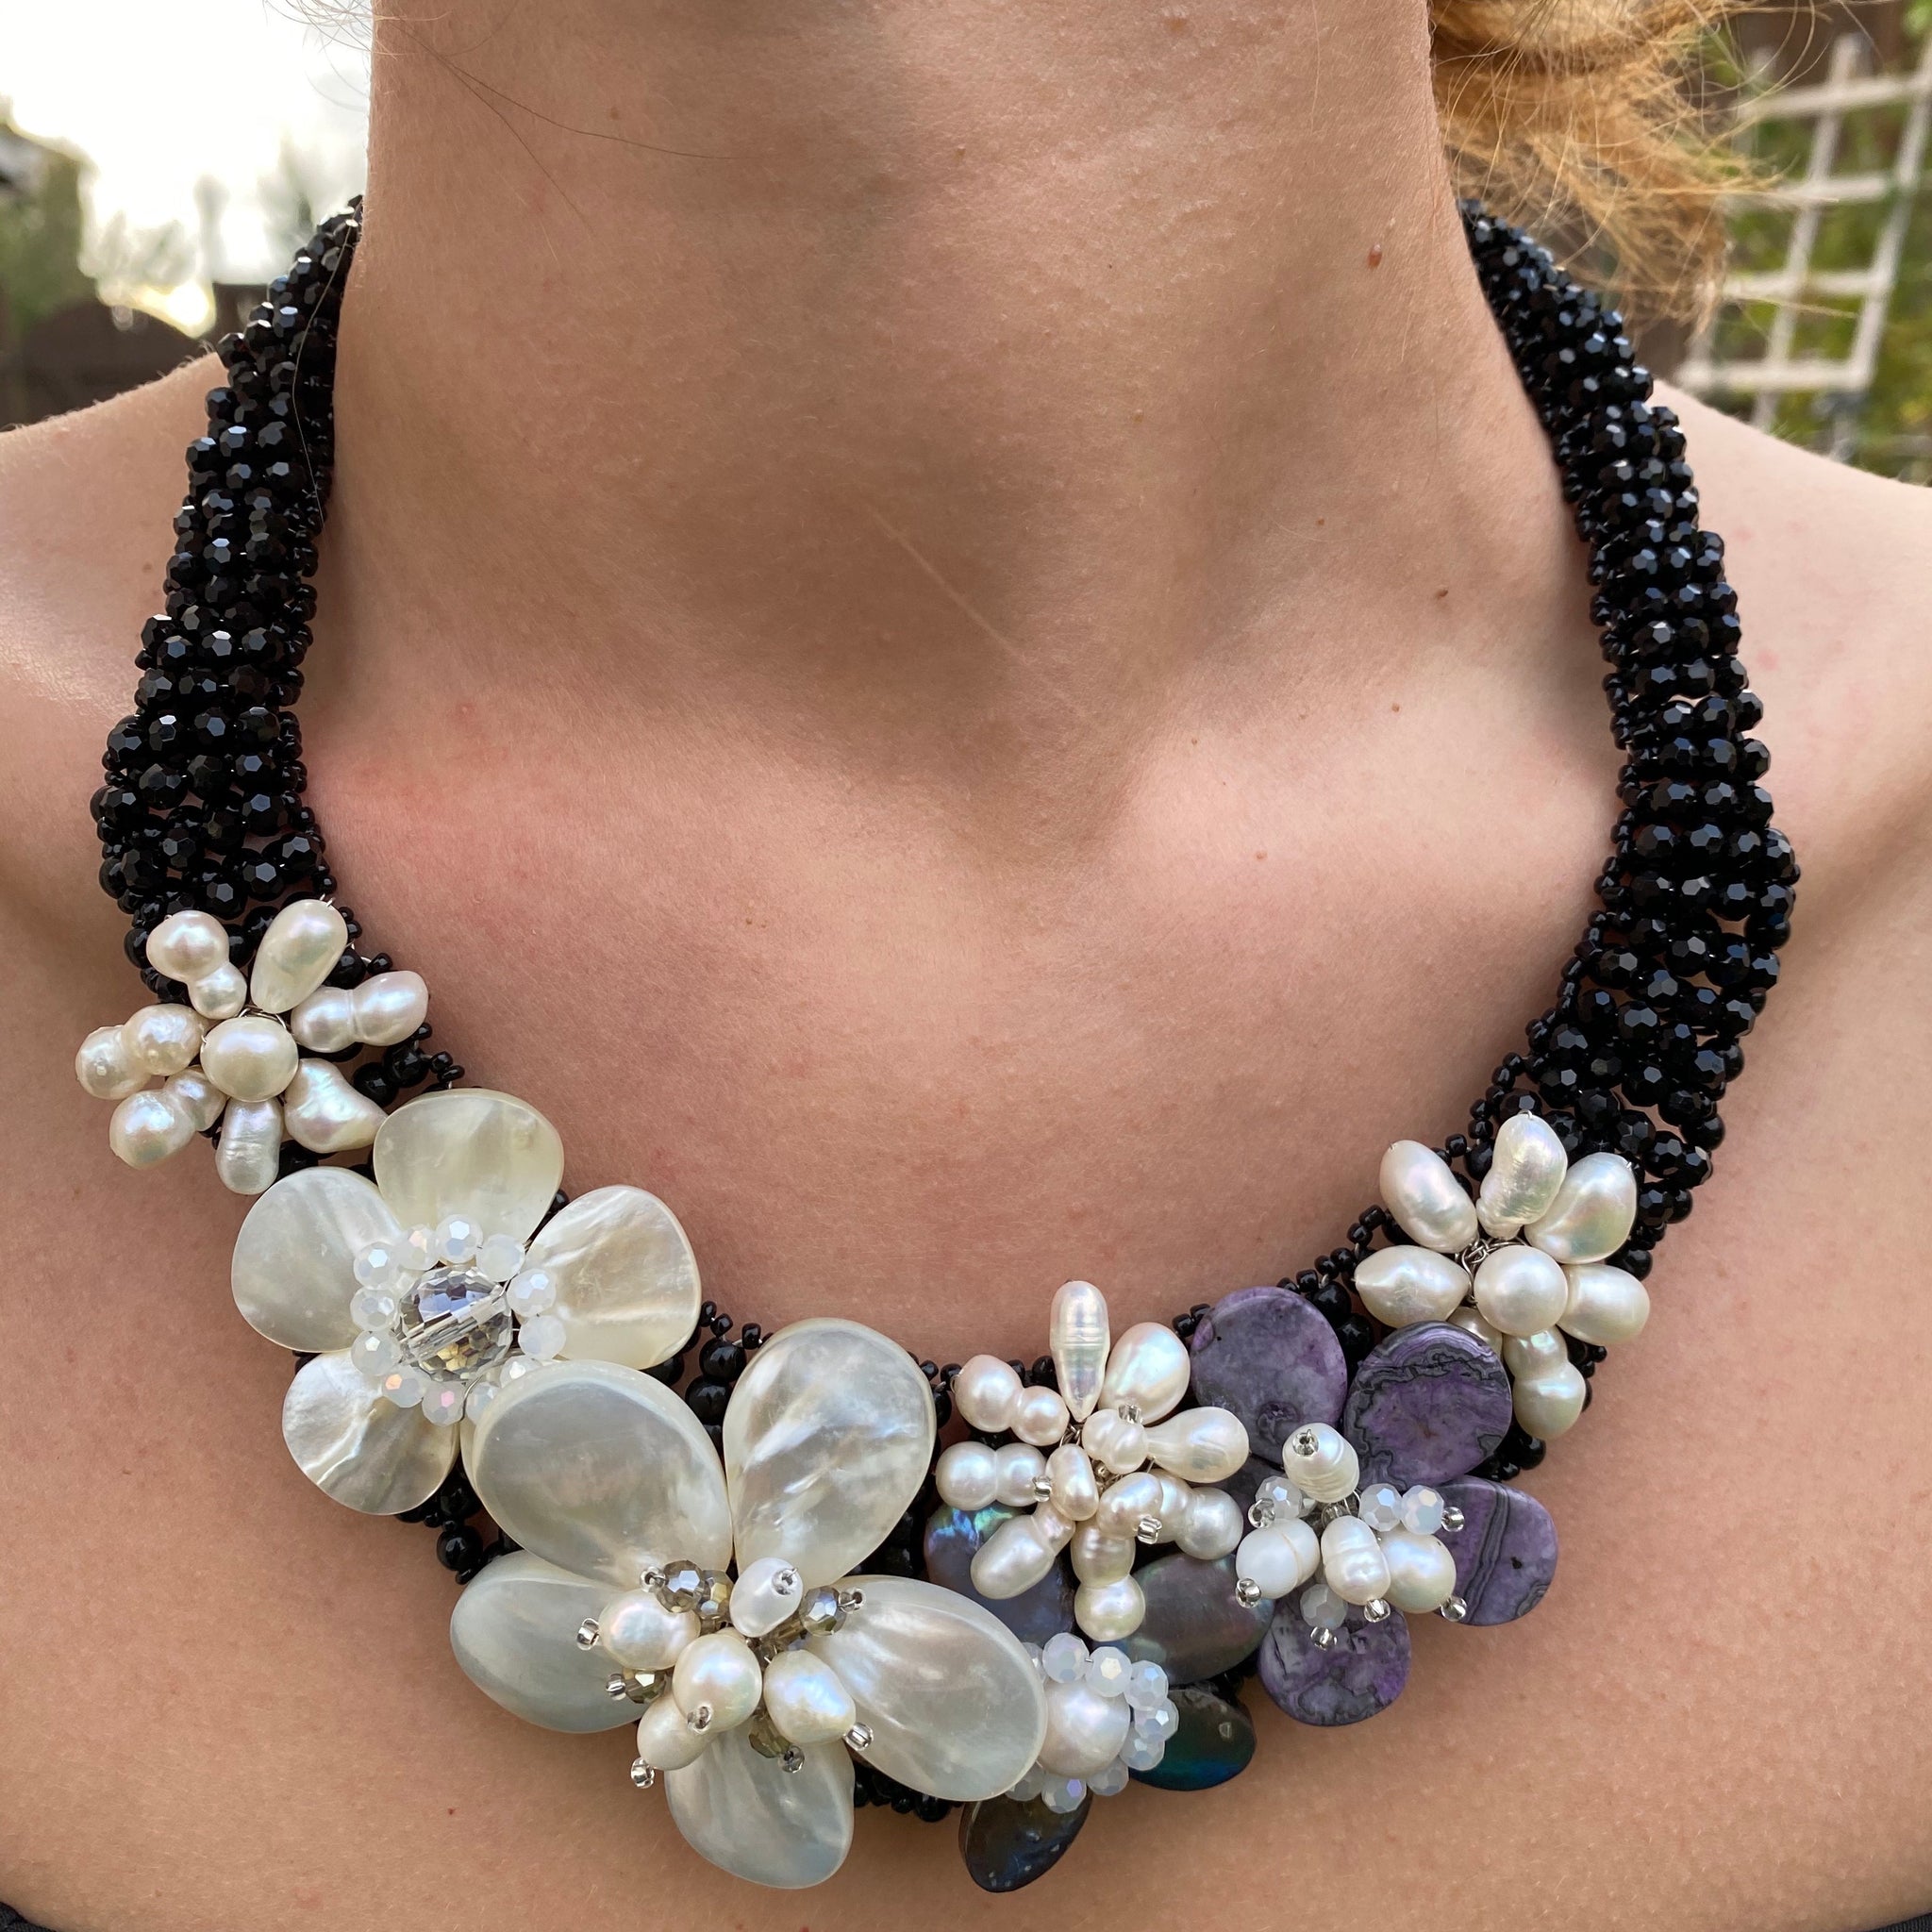 Handmade Necklace 20" Floral Black Onyx Unique Freshwater Shell and Pearls Bib Choker